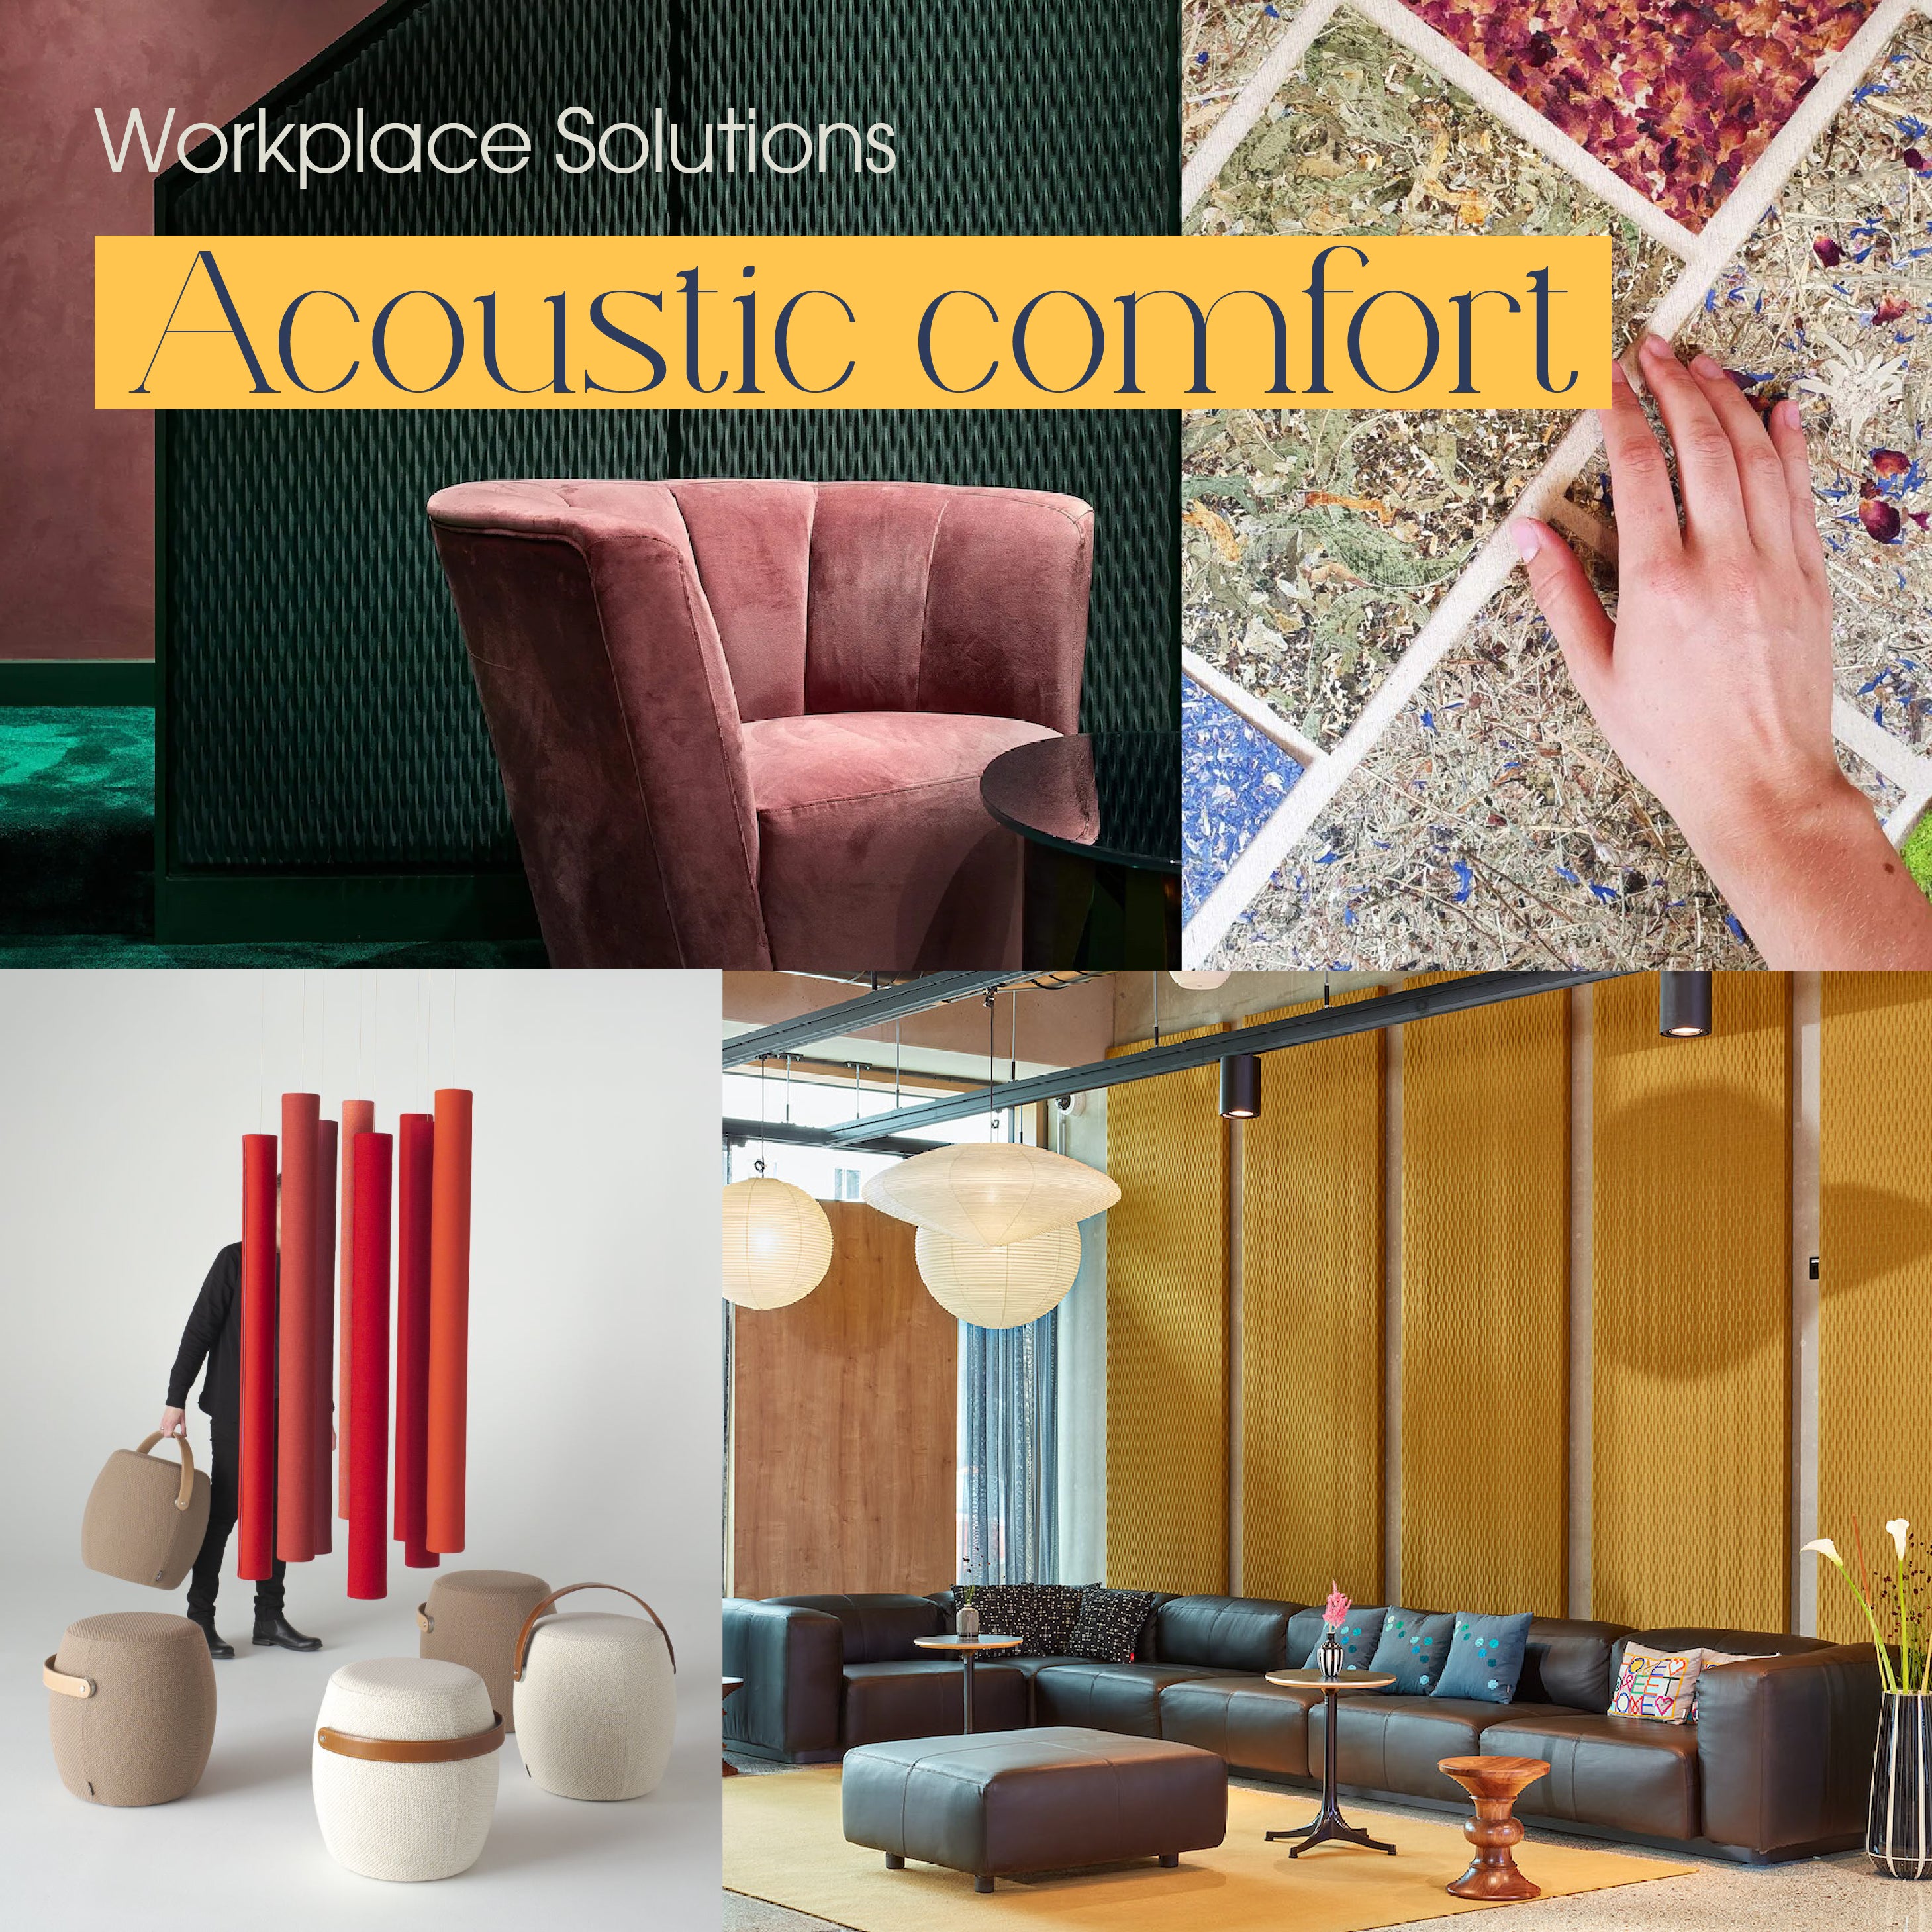 COLOURLIVING | WORKPLACE SOLUTIONS | ACOUSTIC COMFORT